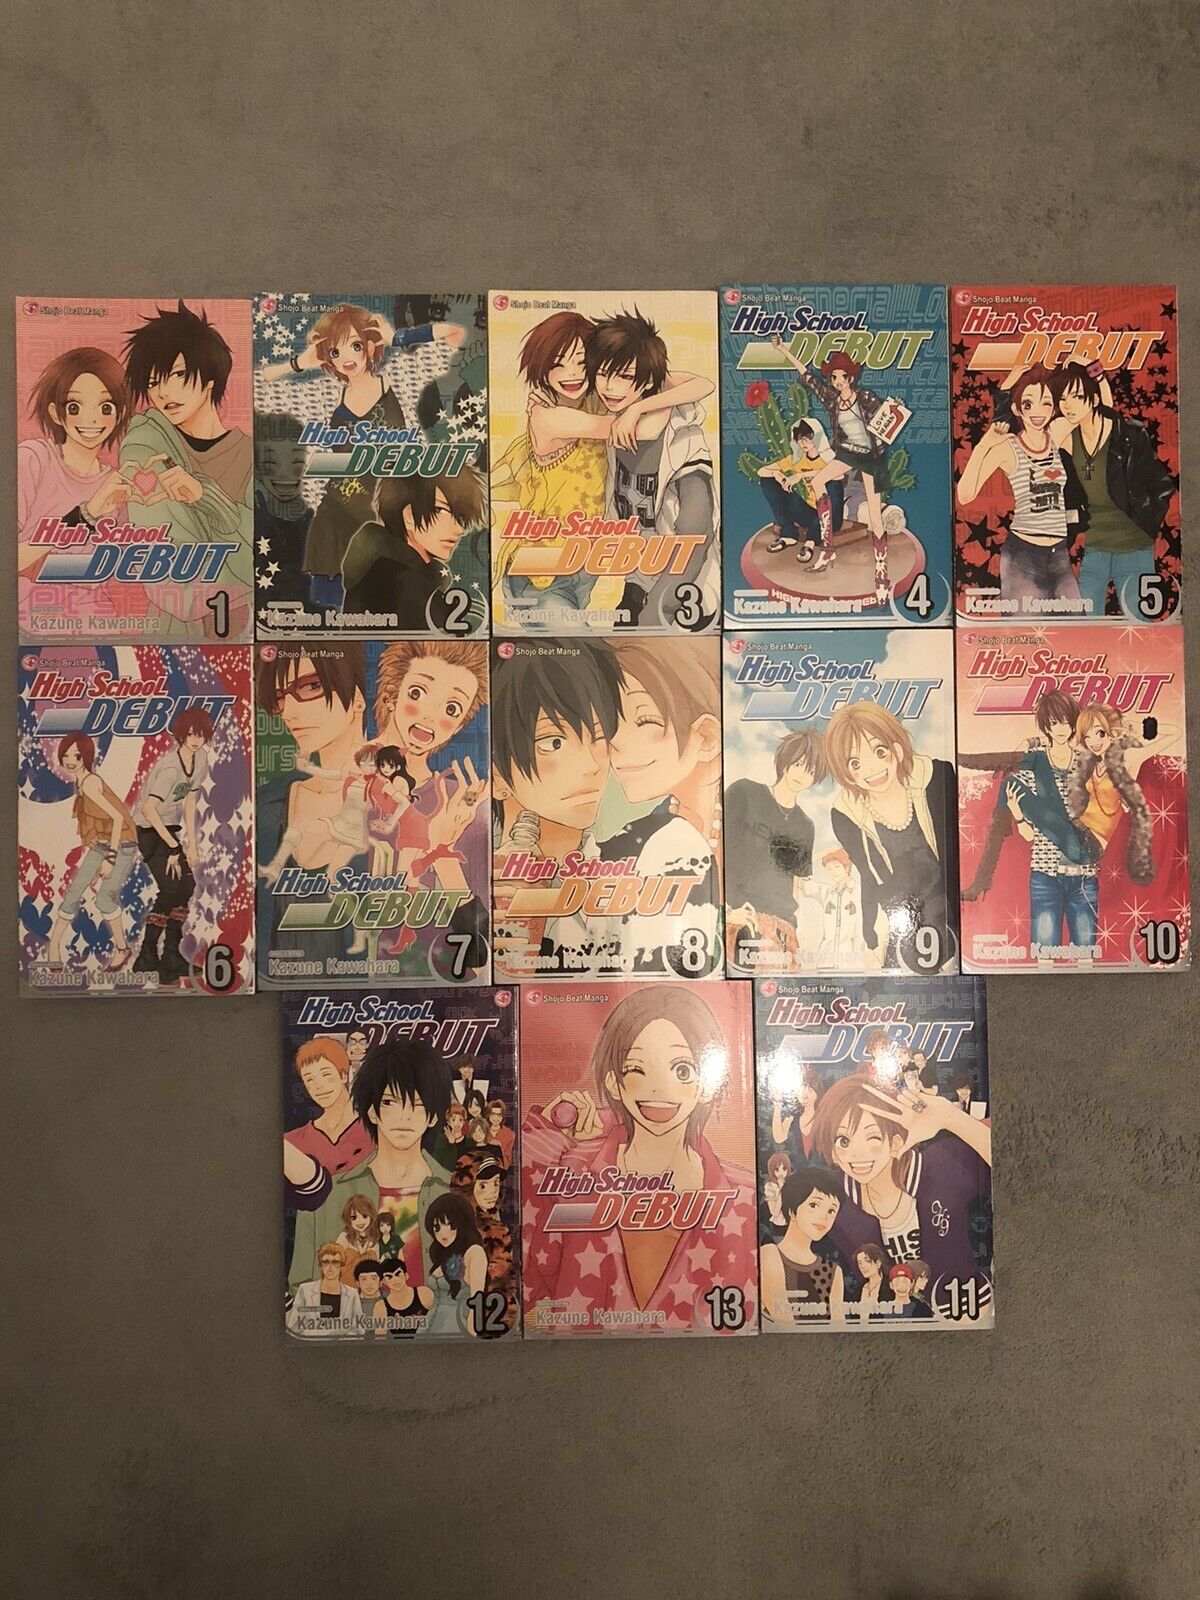 High School Debut Manga - RARE Out Of Print -  Complete 13 Volume Collection